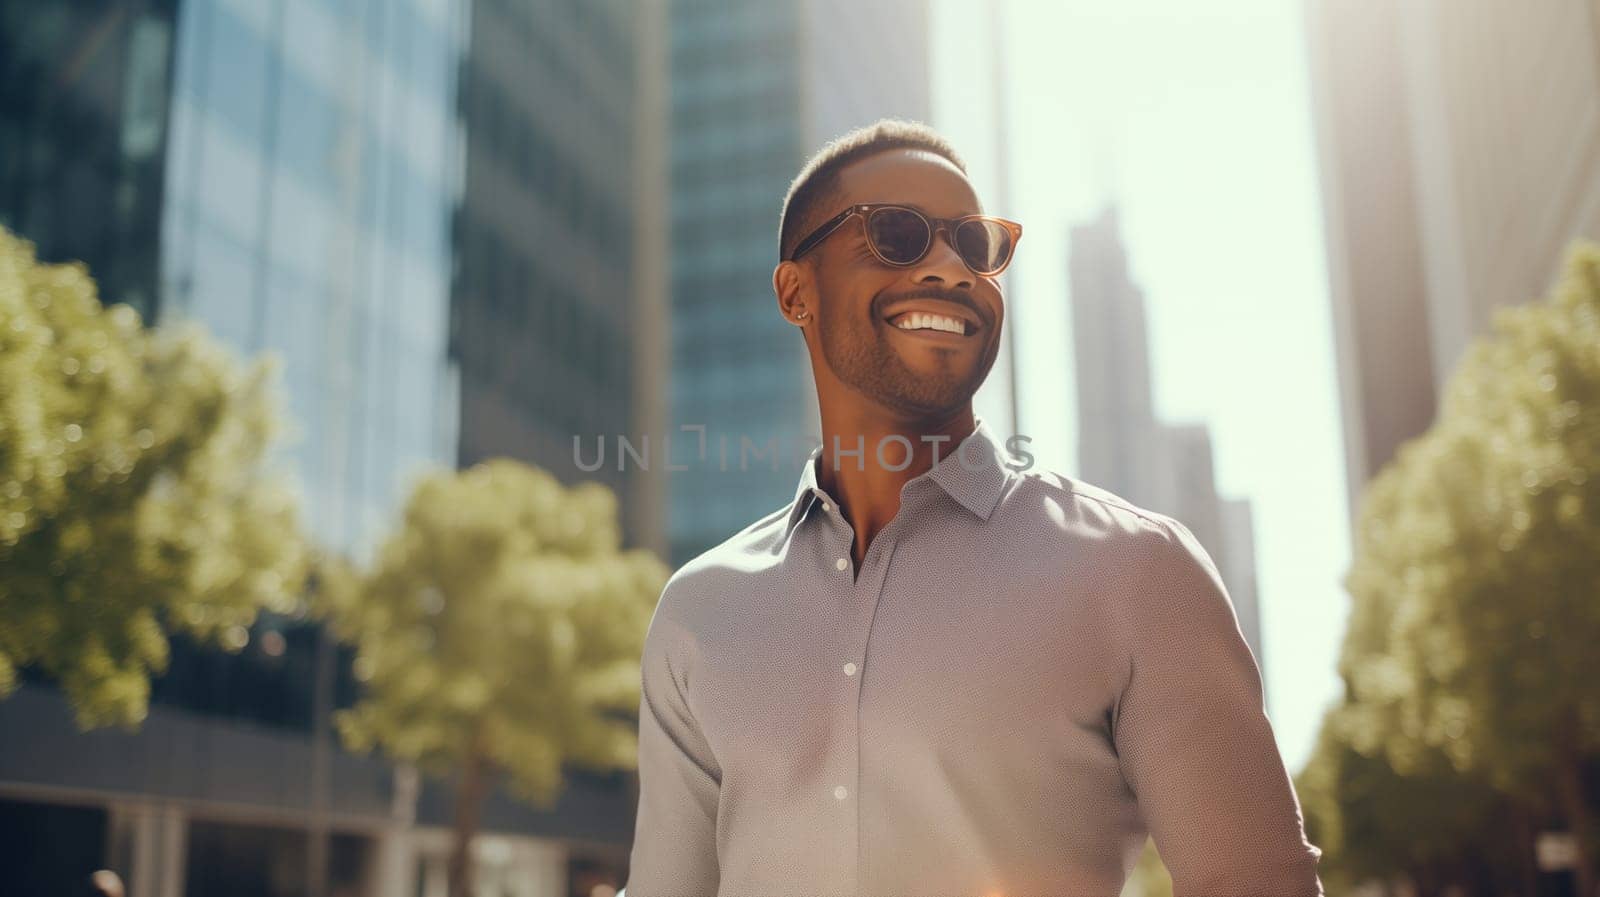 Confident happy smiling black entrepreneur standing in the city, wearing glasses, shirt and looking away